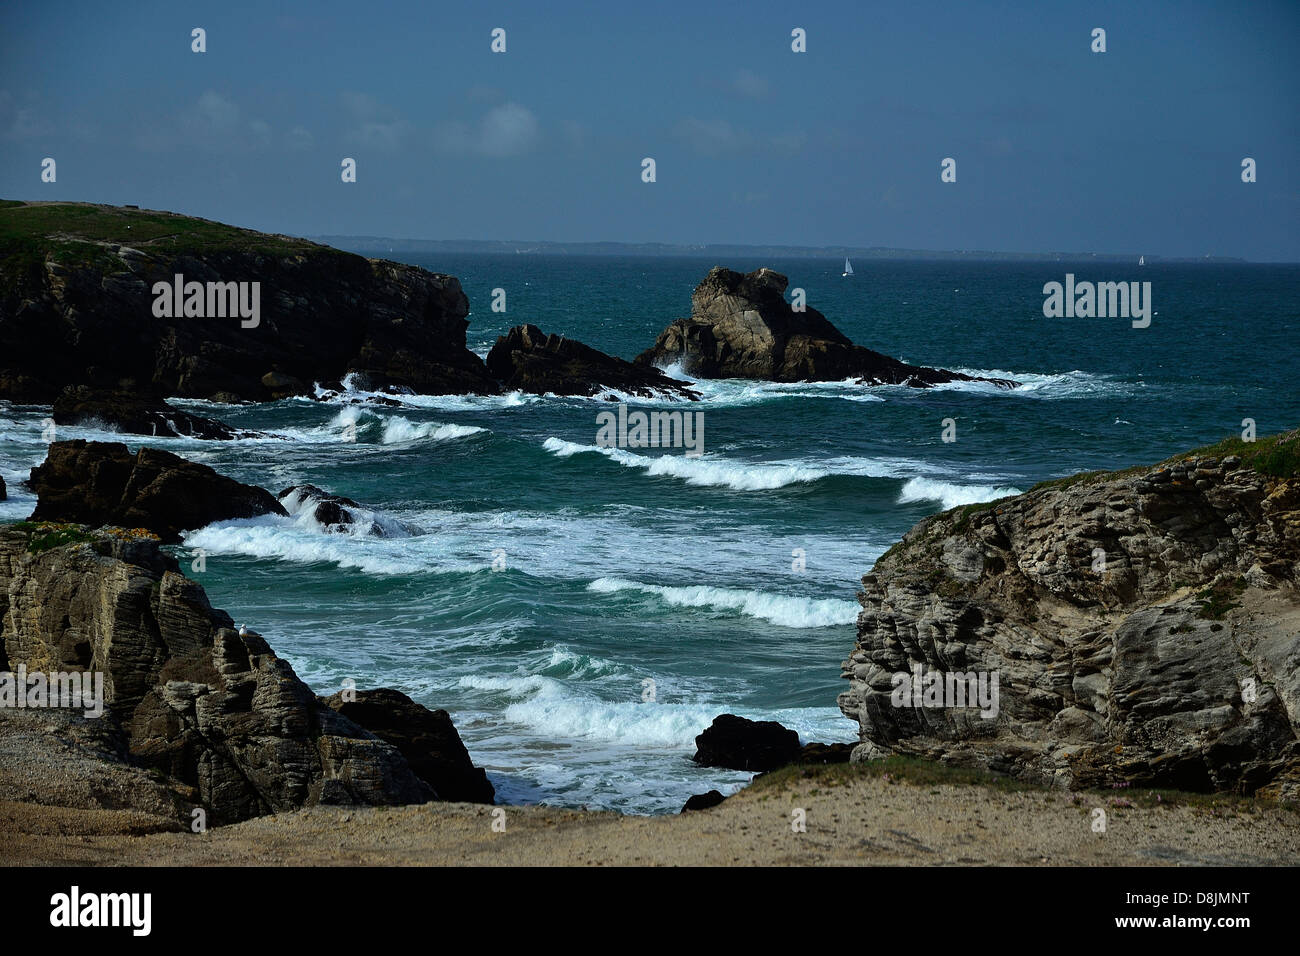 Côte Sauvage (The Wild coast), Port Pigeon (Other name : Port Goulom), Quiberon peninsula (Brittany, France). Stock Photo